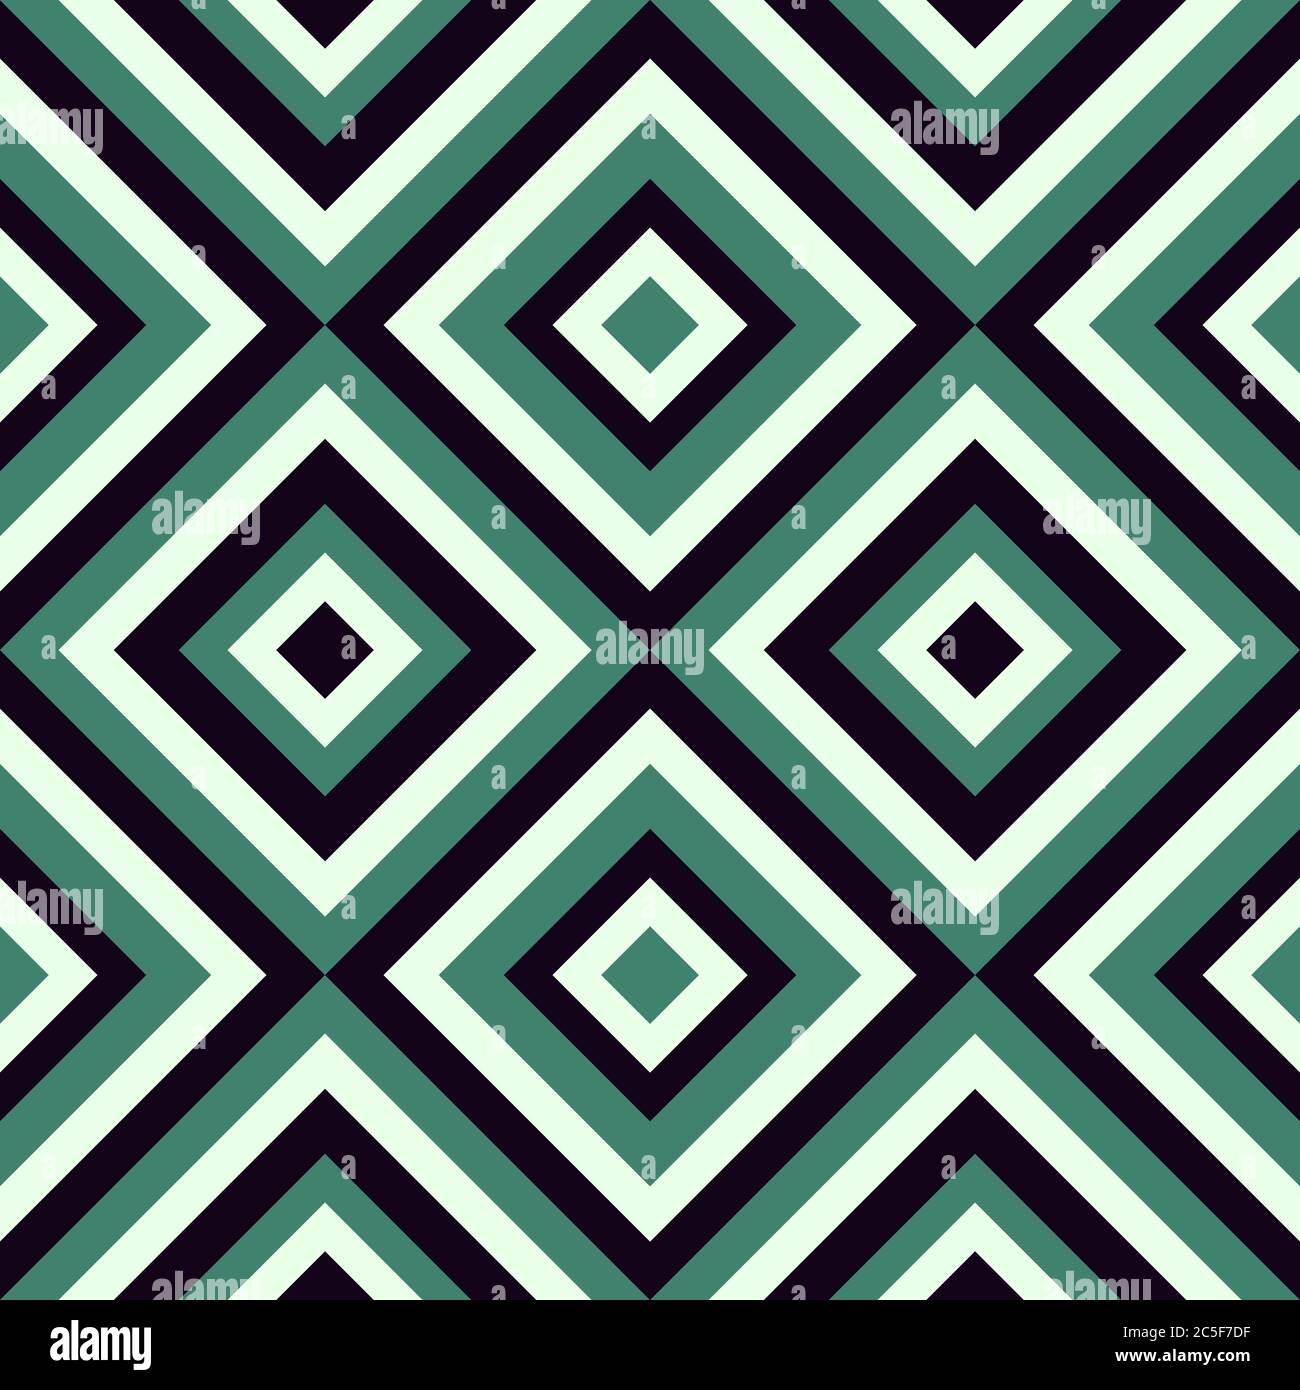 Geometrical pattern in retro colors, seamless vector background. For fashion textile, cloth, backgrounds. Stock Vector